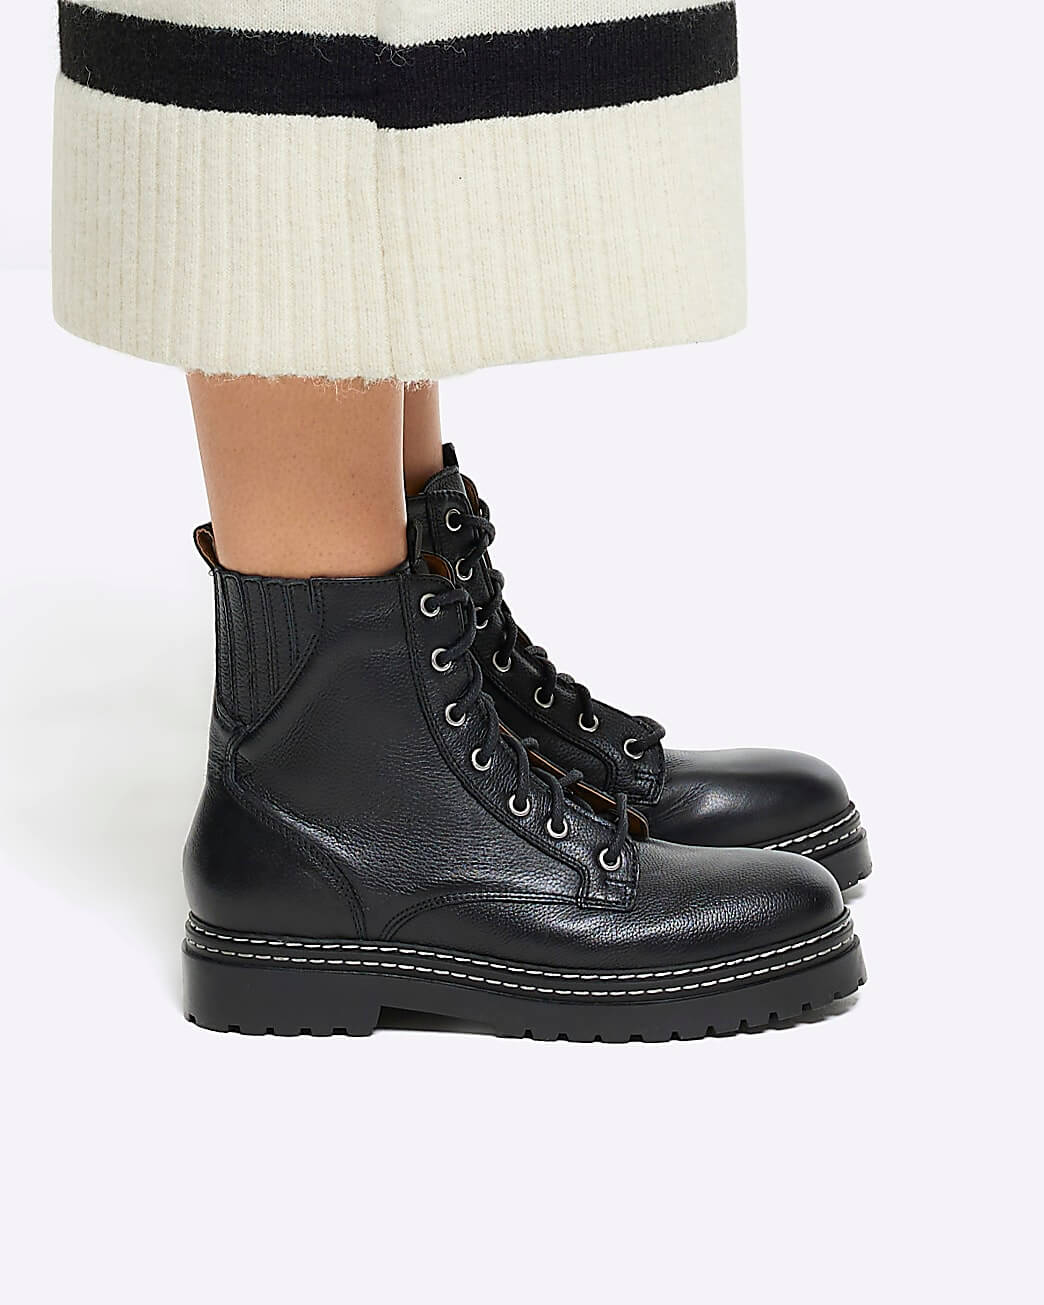 Black Leather Lace Up Boots, £70, River Island